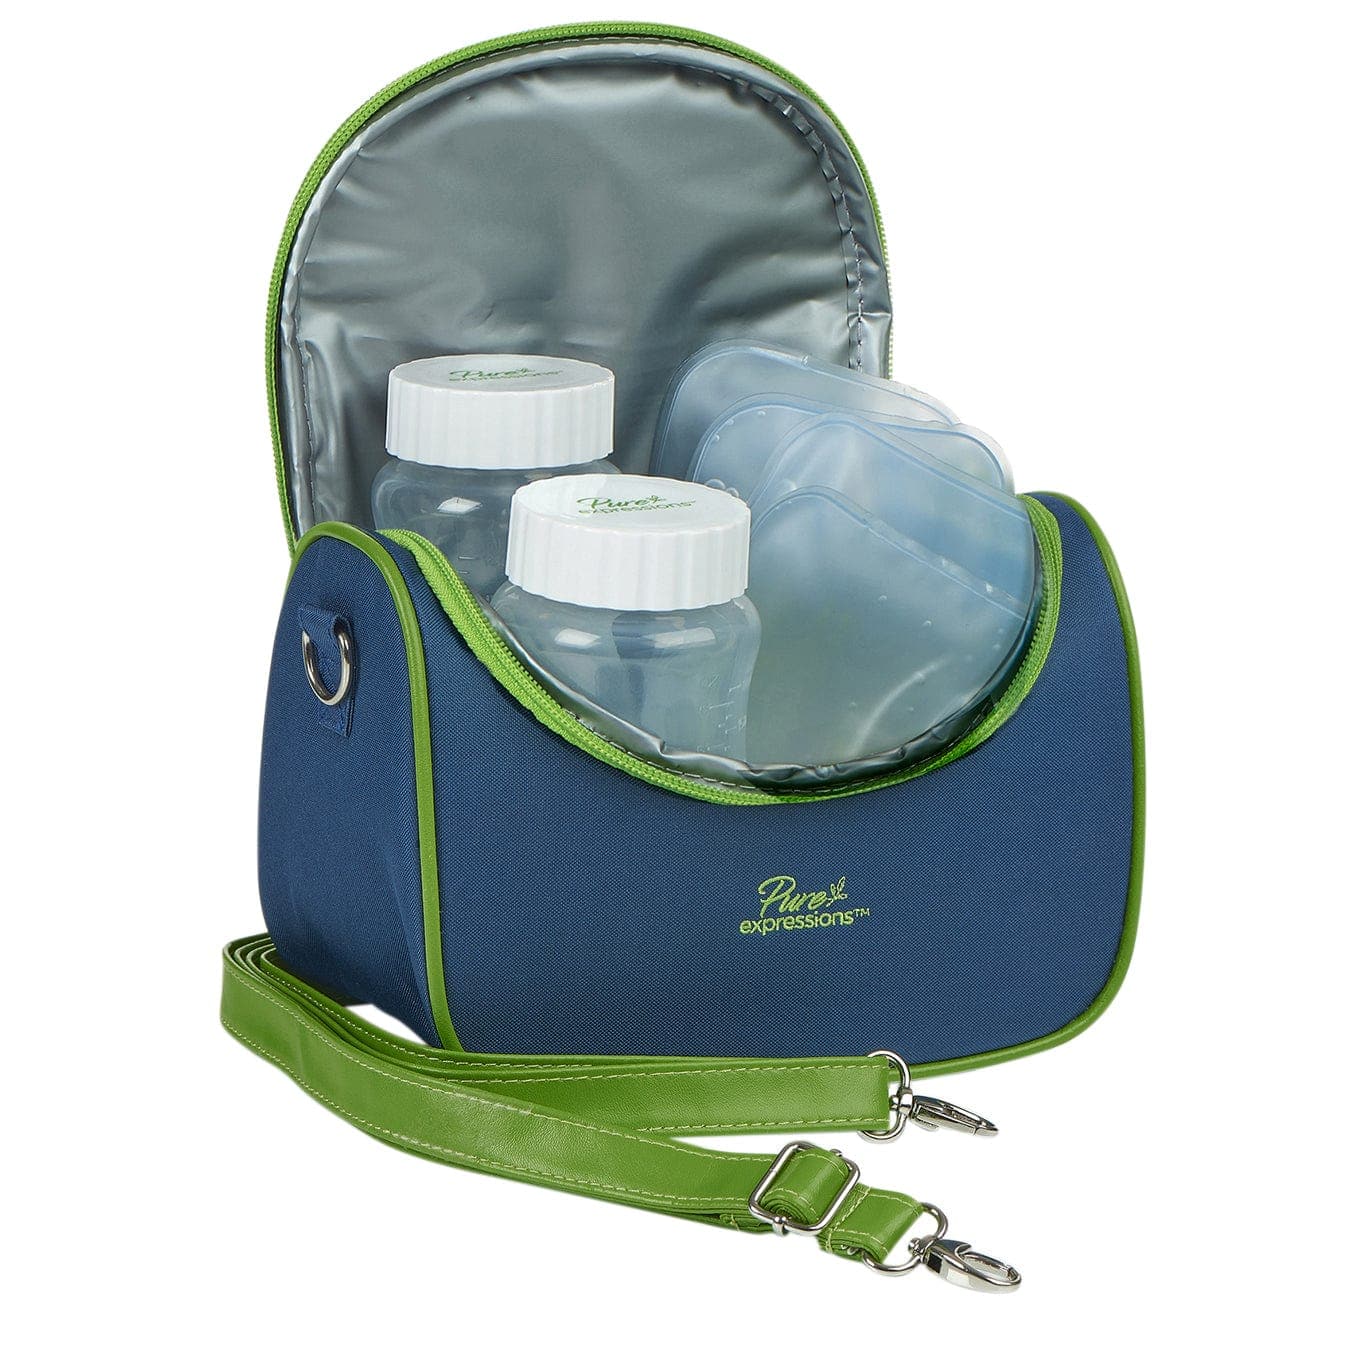 Drive Medical Personal Care Drive Medical Pure Expressions Insulated Cooler Bag